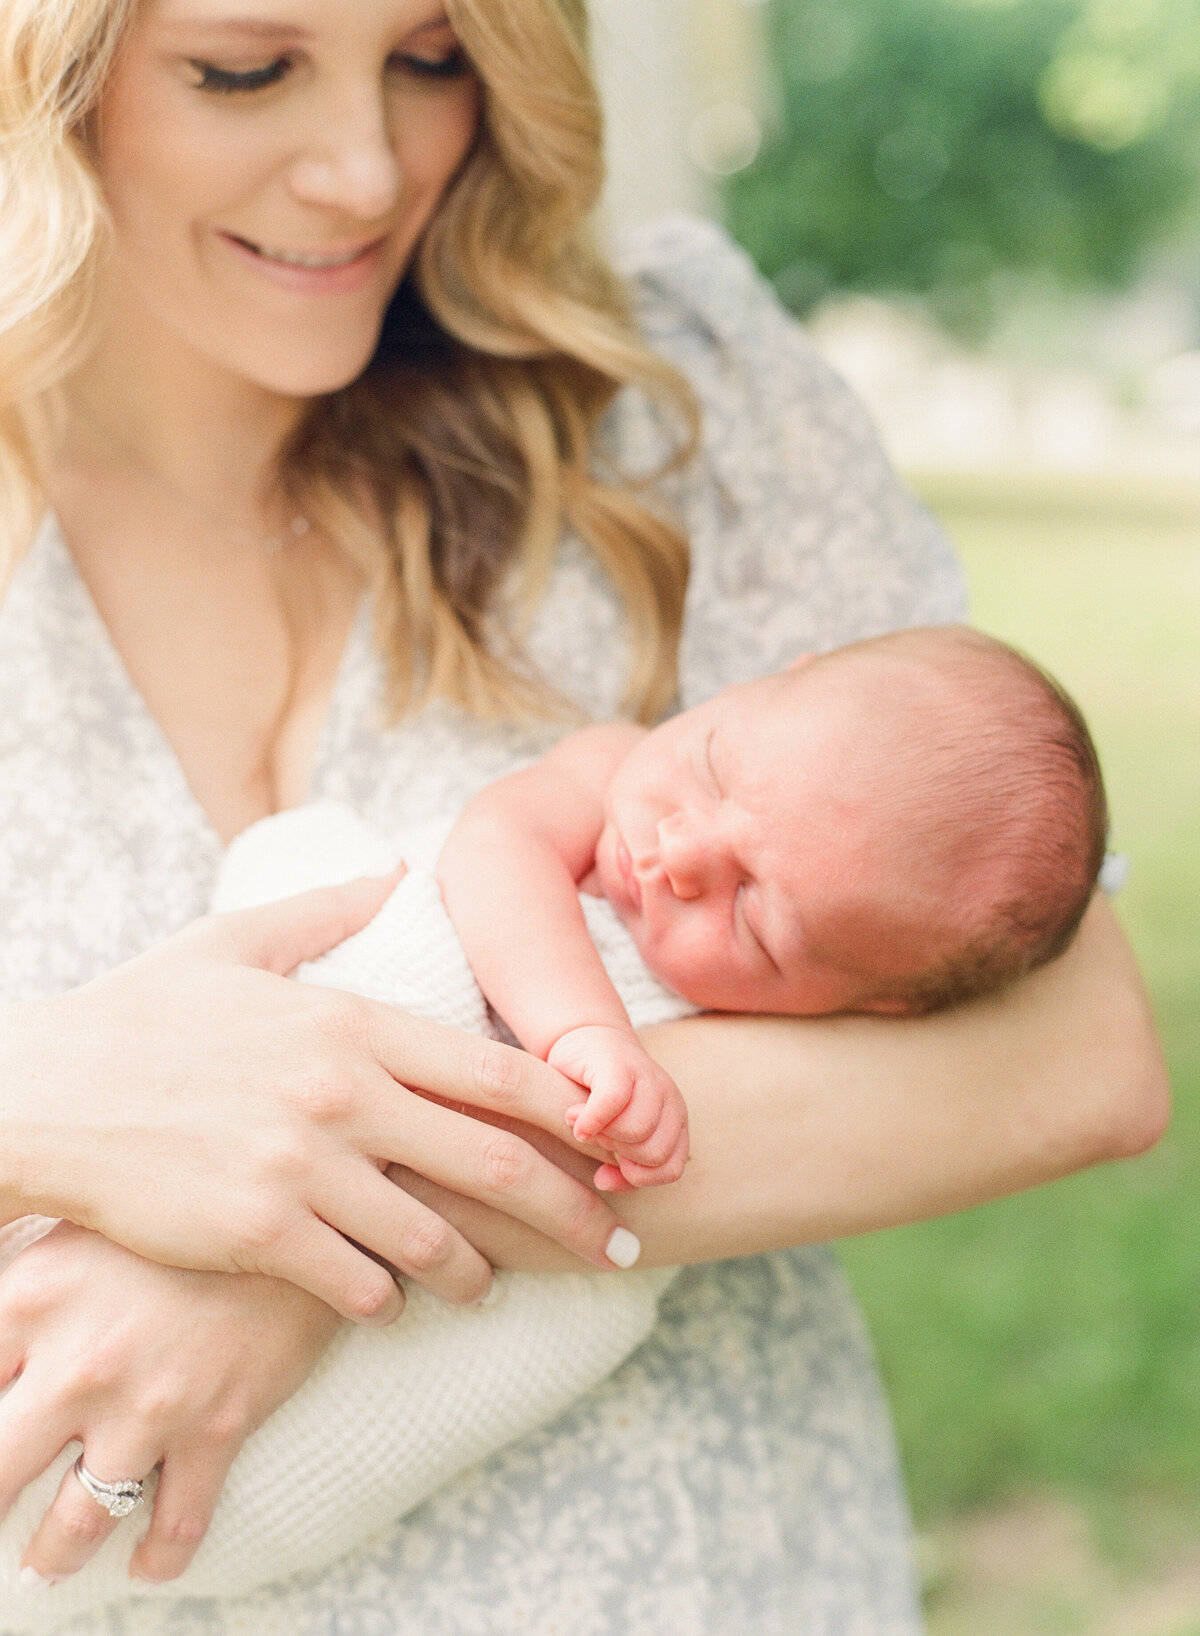 Mom holds newborn son and he grabs her finger during a Raleigh newborn photography session. Photographed by Raleigh newborn photographer A.J. Dunlap Photography.